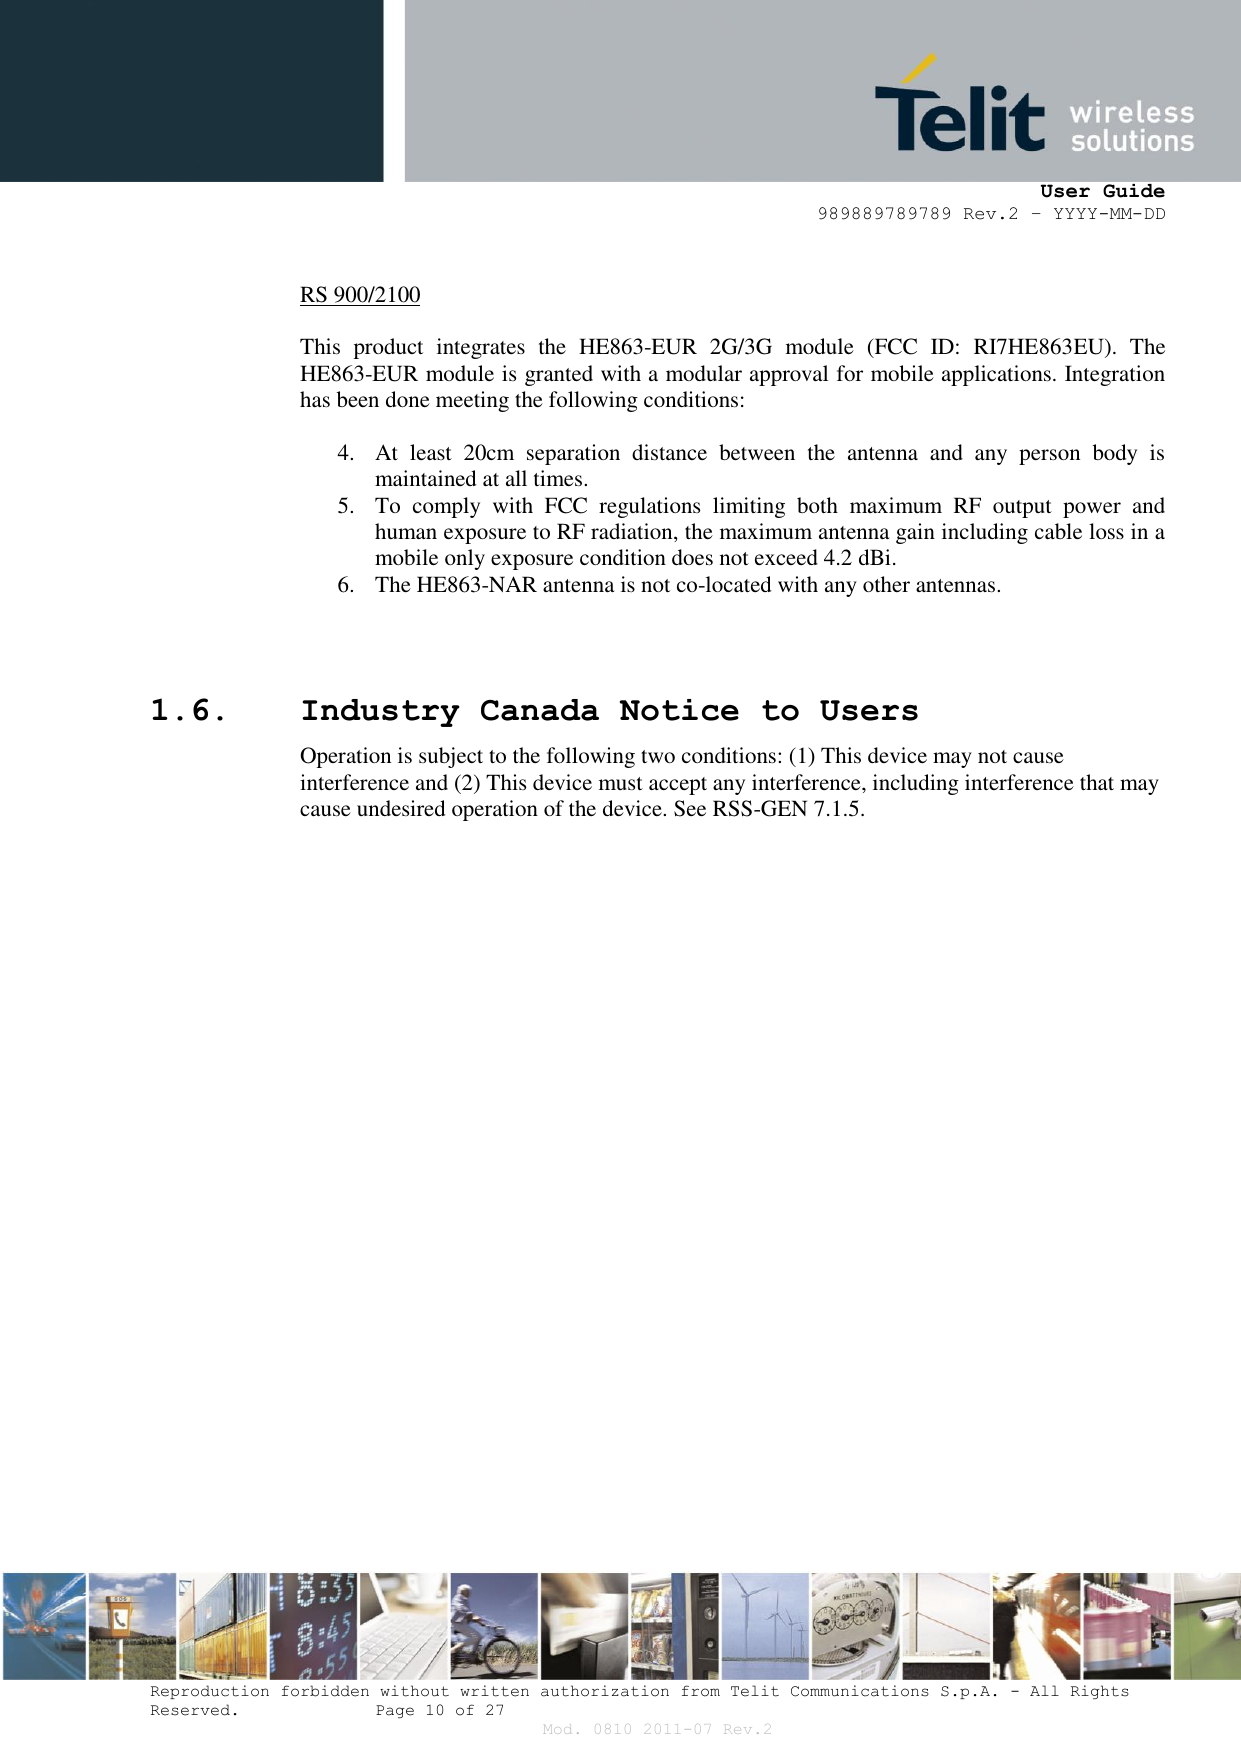      User Guide 989889789789 Rev.2 – YYYY-MM-DD  Reproduction forbidden without written authorization from Telit Communications S.p.A. - All Rights Reserved.    Page 10 of 27 Mod. 0810 2011-07 Rev.2  RS 900/2100  This  product  integrates  the  HE863-EUR  2G/3G  module  (FCC  ID:  RI7HE863EU).  The HE863-EUR module is granted with a modular approval for mobile applications. Integration has been done meeting the following conditions:  4. At  least  20cm  separation  distance  between  the  antenna  and  any  person  body  is maintained at all times. 5. To  comply  with  FCC  regulations  limiting  both  maximum  RF  output  power  and human exposure to RF radiation, the maximum antenna gain including cable loss in a mobile only exposure condition does not exceed 4.2 dBi. 6. The HE863-NAR antenna is not co-located with any other antennas.   1.6. Industry Canada Notice to Users Operation is subject to the following two conditions: (1) This device may not cause interference and (2) This device must accept any interference, including interference that may cause undesired operation of the device. See RSS-GEN 7.1.5.    